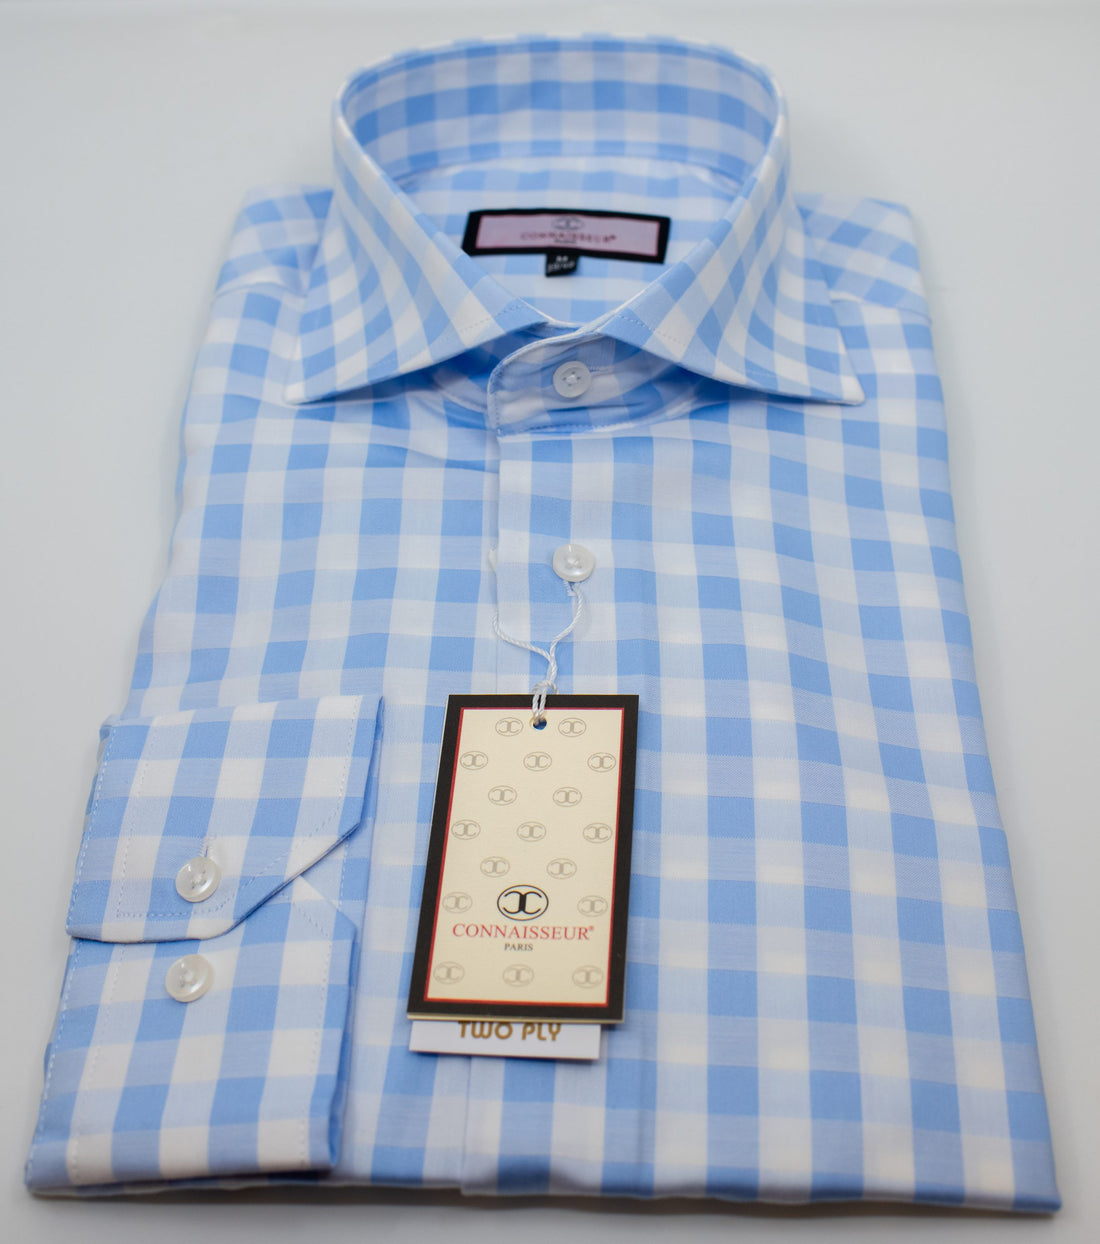 Sky blue and white Gingham check spread collar two ply cotton slim fit dress shirt